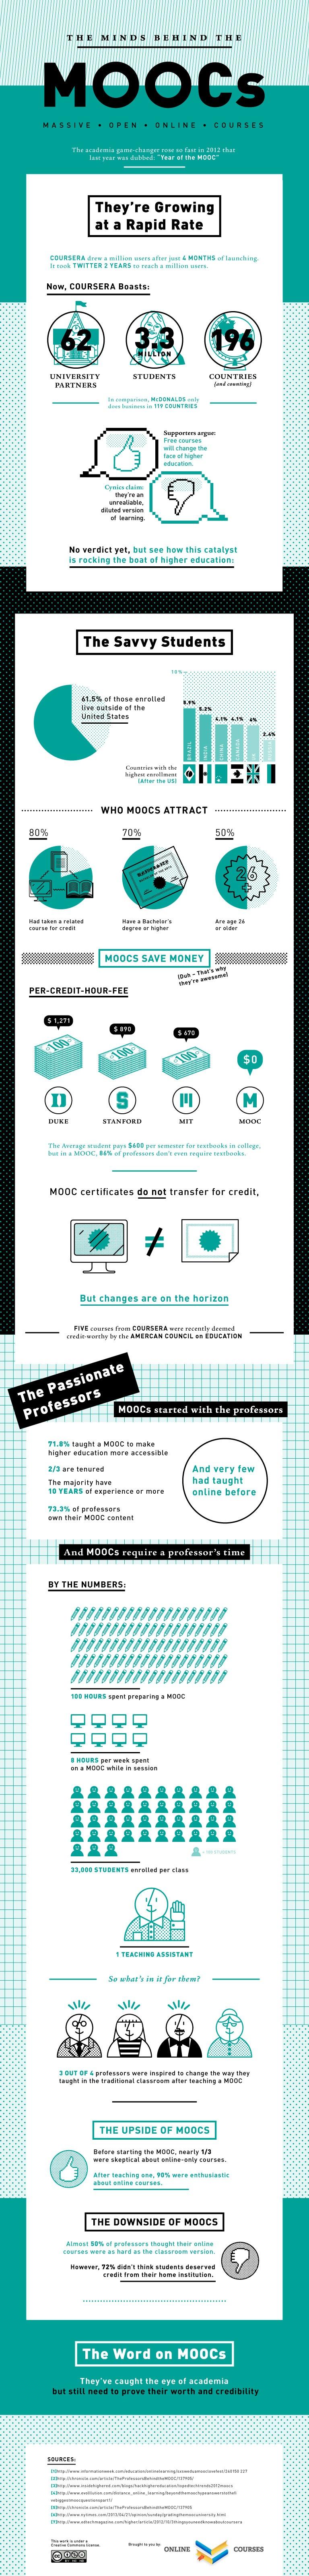 the Minds Behind the Moocs